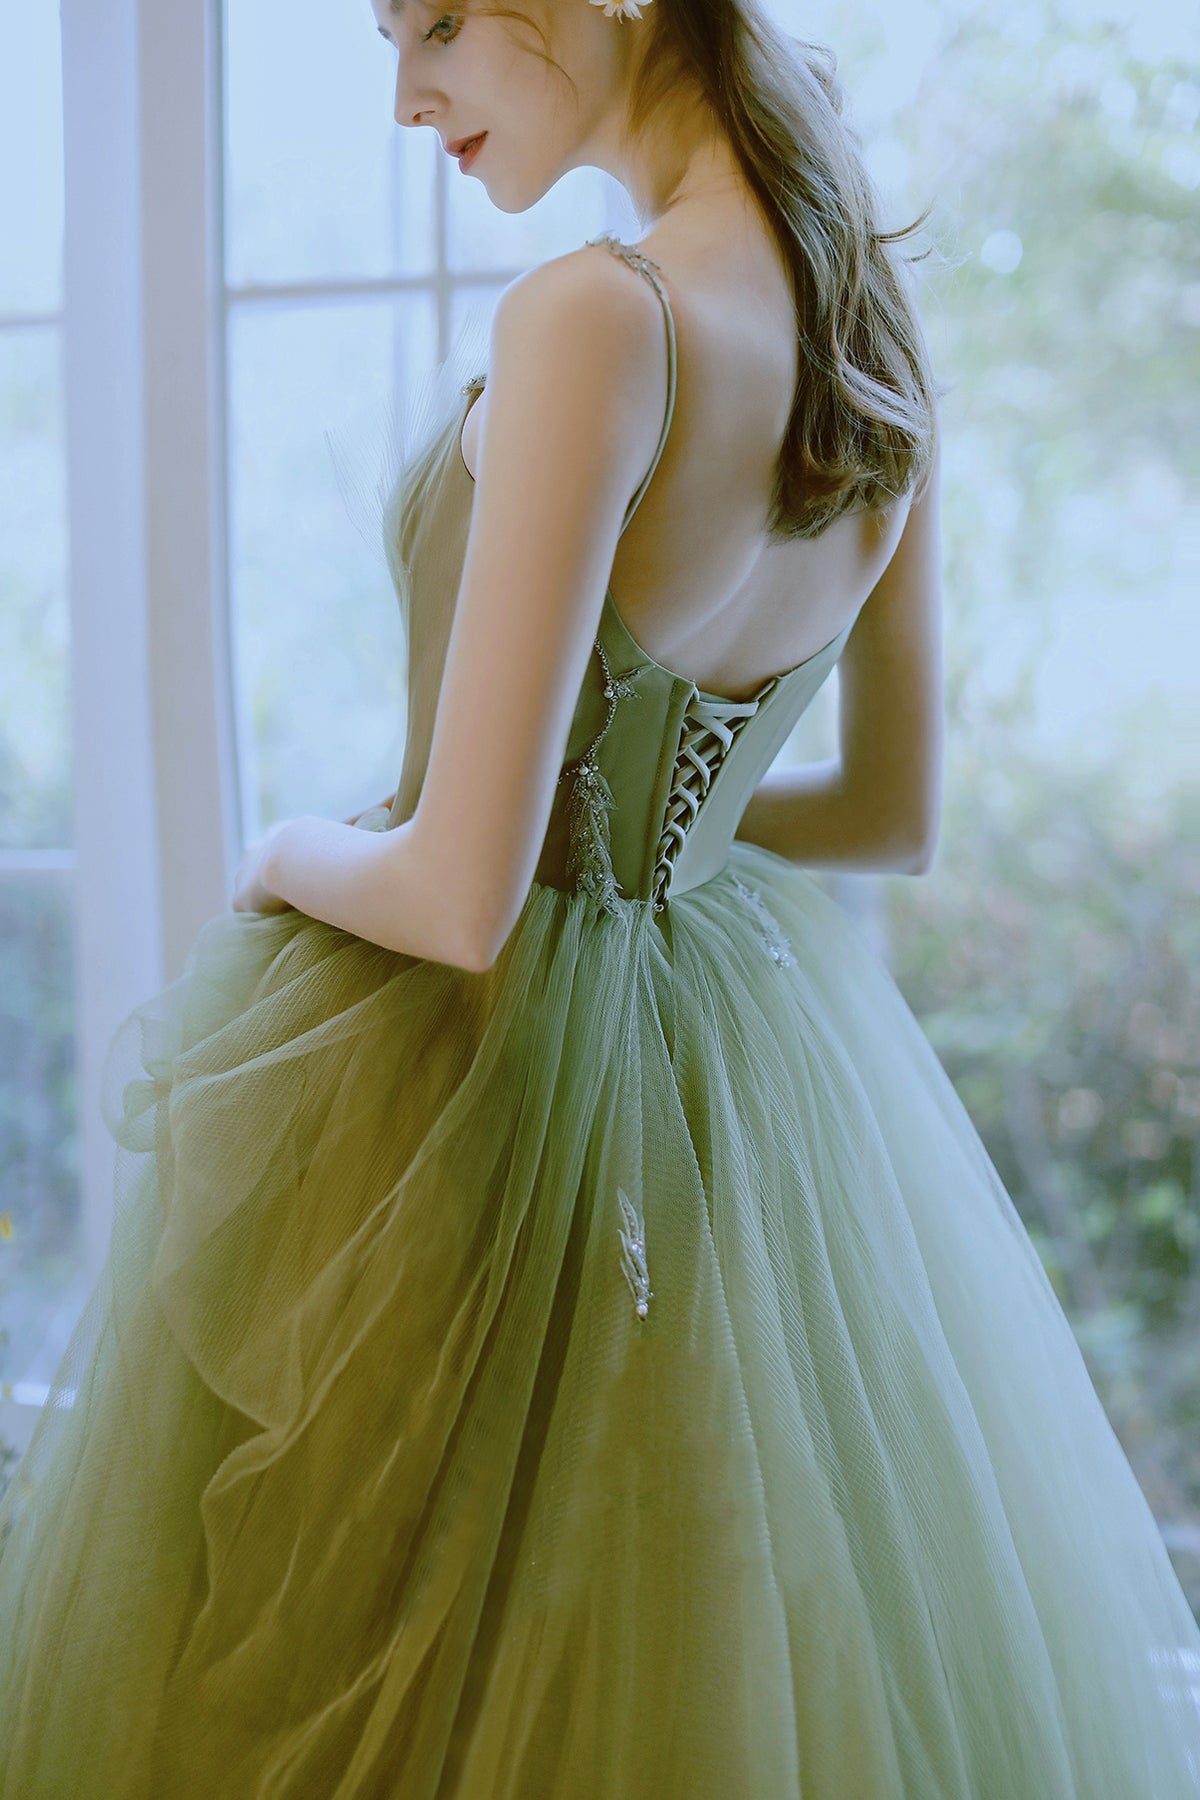 Viniodress Bright Pink Tulle Prom Dress with Pockets Green Leaves Maxi Dress SD1439 Pink / US4